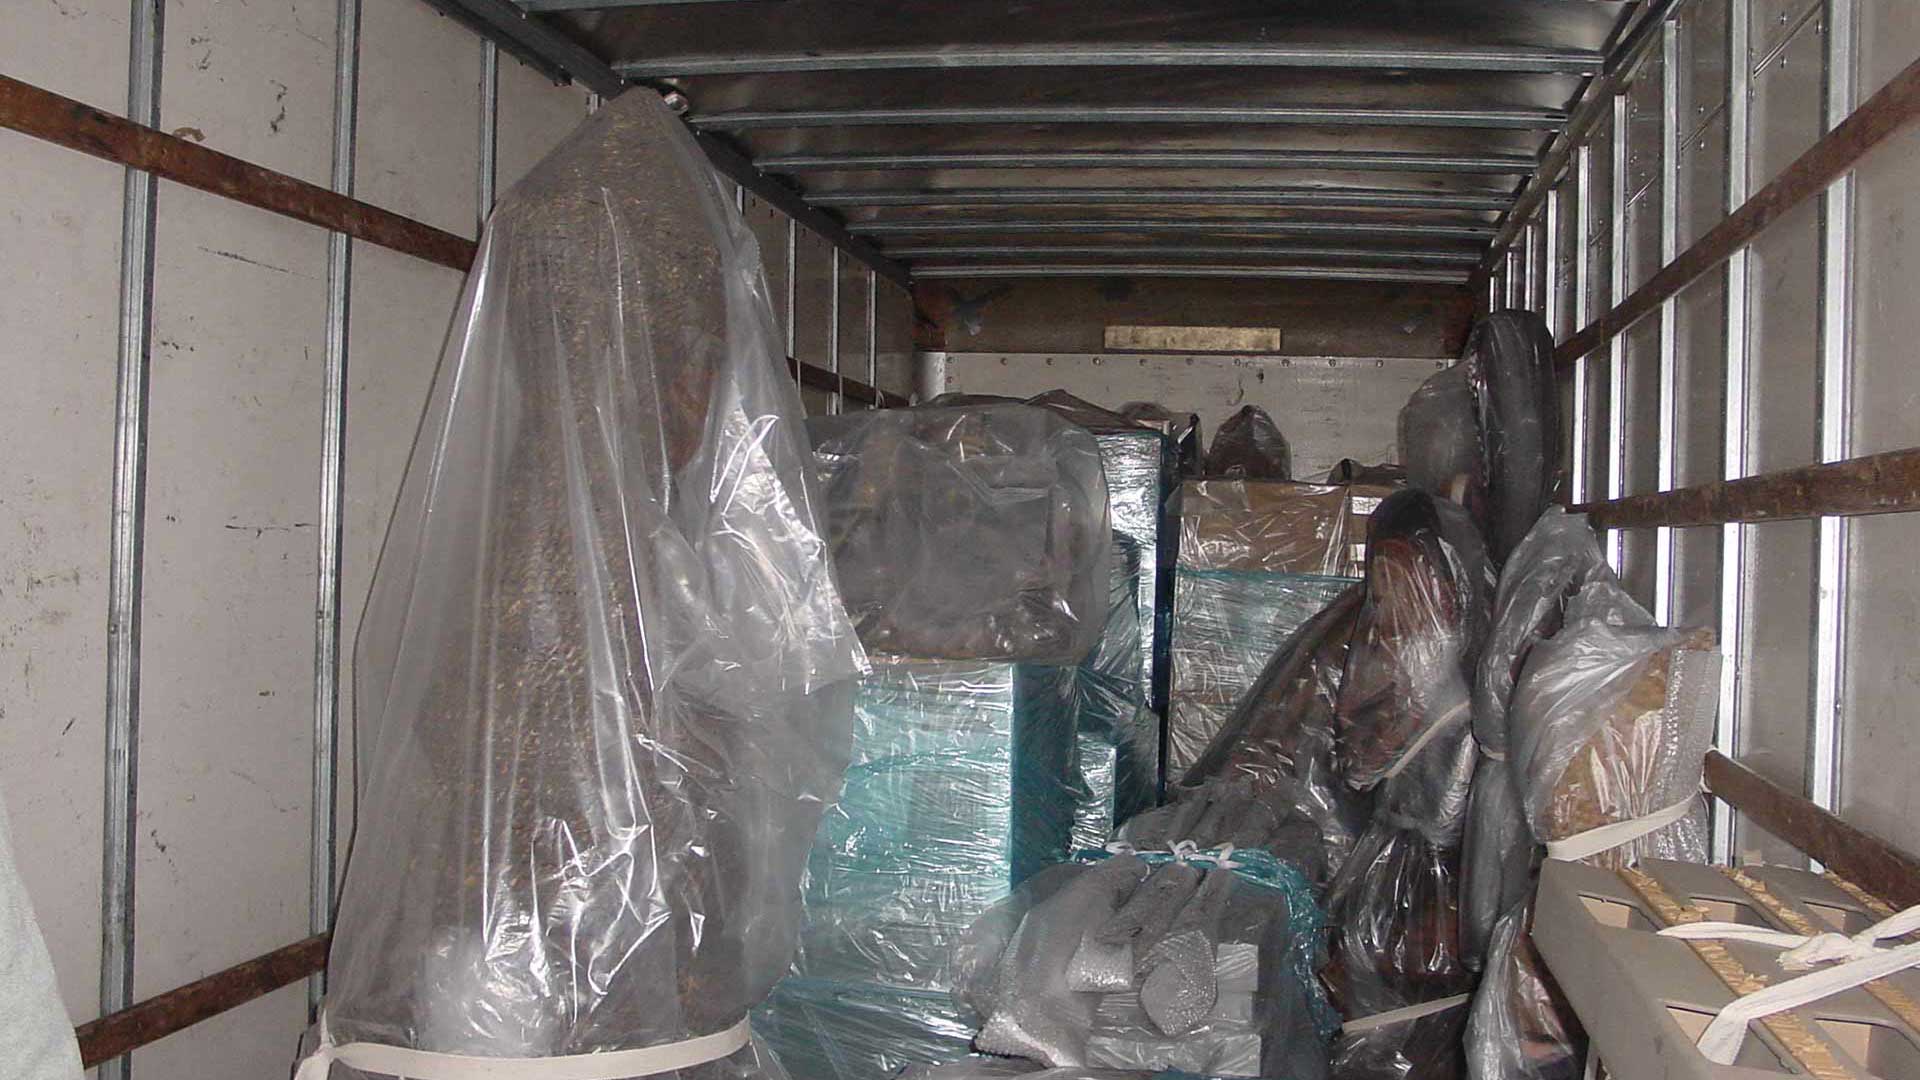 The truck fully loaded with artifacts